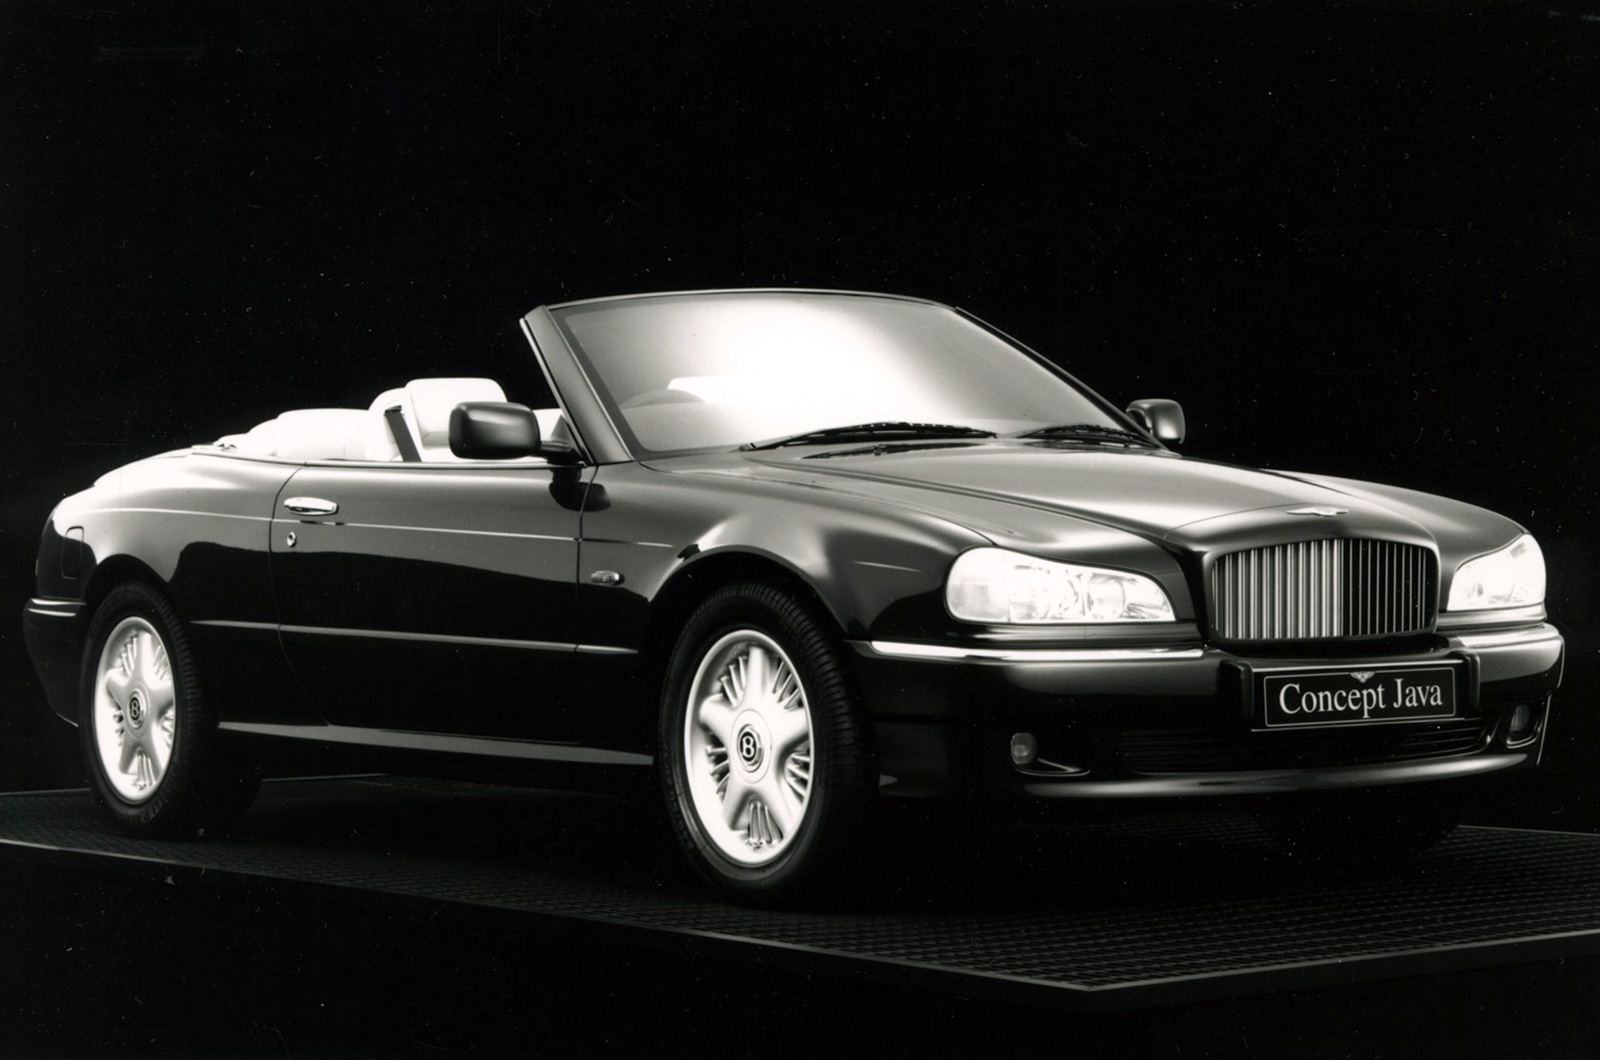 <p><span>Unveiled at the 1994 Geneva motor show, the Bentley Concept Java was designed by Bentley's head of design <strong>Graham Hull</strong>, along with Roy Axe, the man behind the <strong>MG EX-E </strong>concept. Designed purely to test reaction, the Concept Java was spotted by the Sultan of Brunei who promptly ordered <strong>18 </strong>of them, split equally between coupes, convertibles and wagons. The Concept Java was a runner; based on a <strong>BMW 5 Series </strong>platform it featured a <strong>3.5-liter </strong>twin-turbo V8, but the Sultan's cars got a 4.0-liter engine.</span></p>